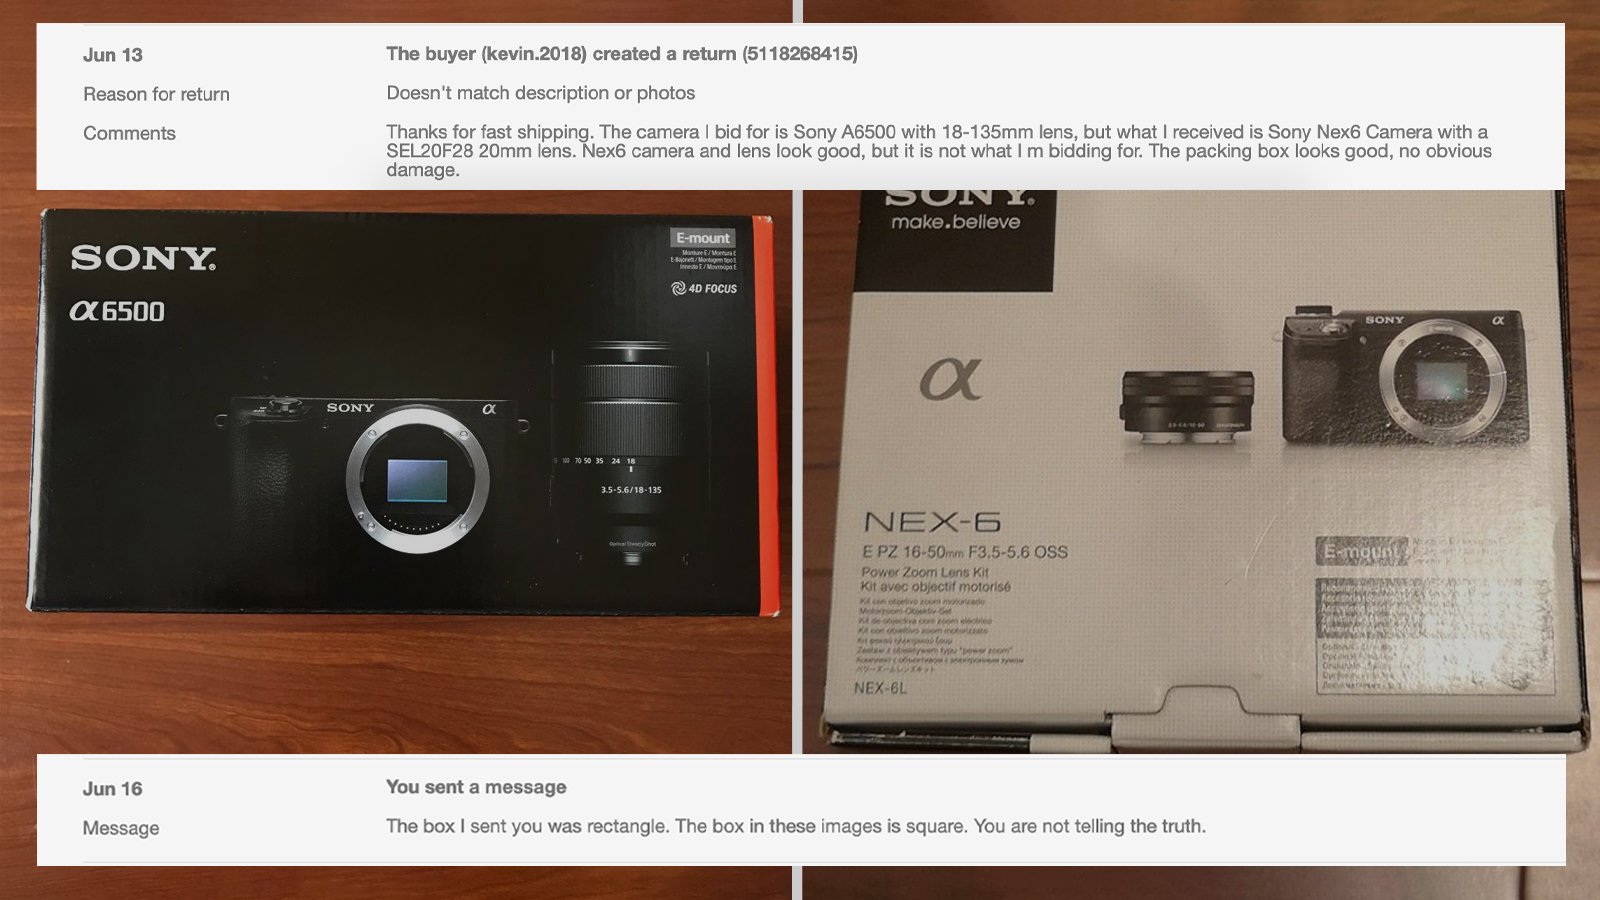 eBay Scam: Buyer Steals Camera by Pretending to Receive Wrong Product